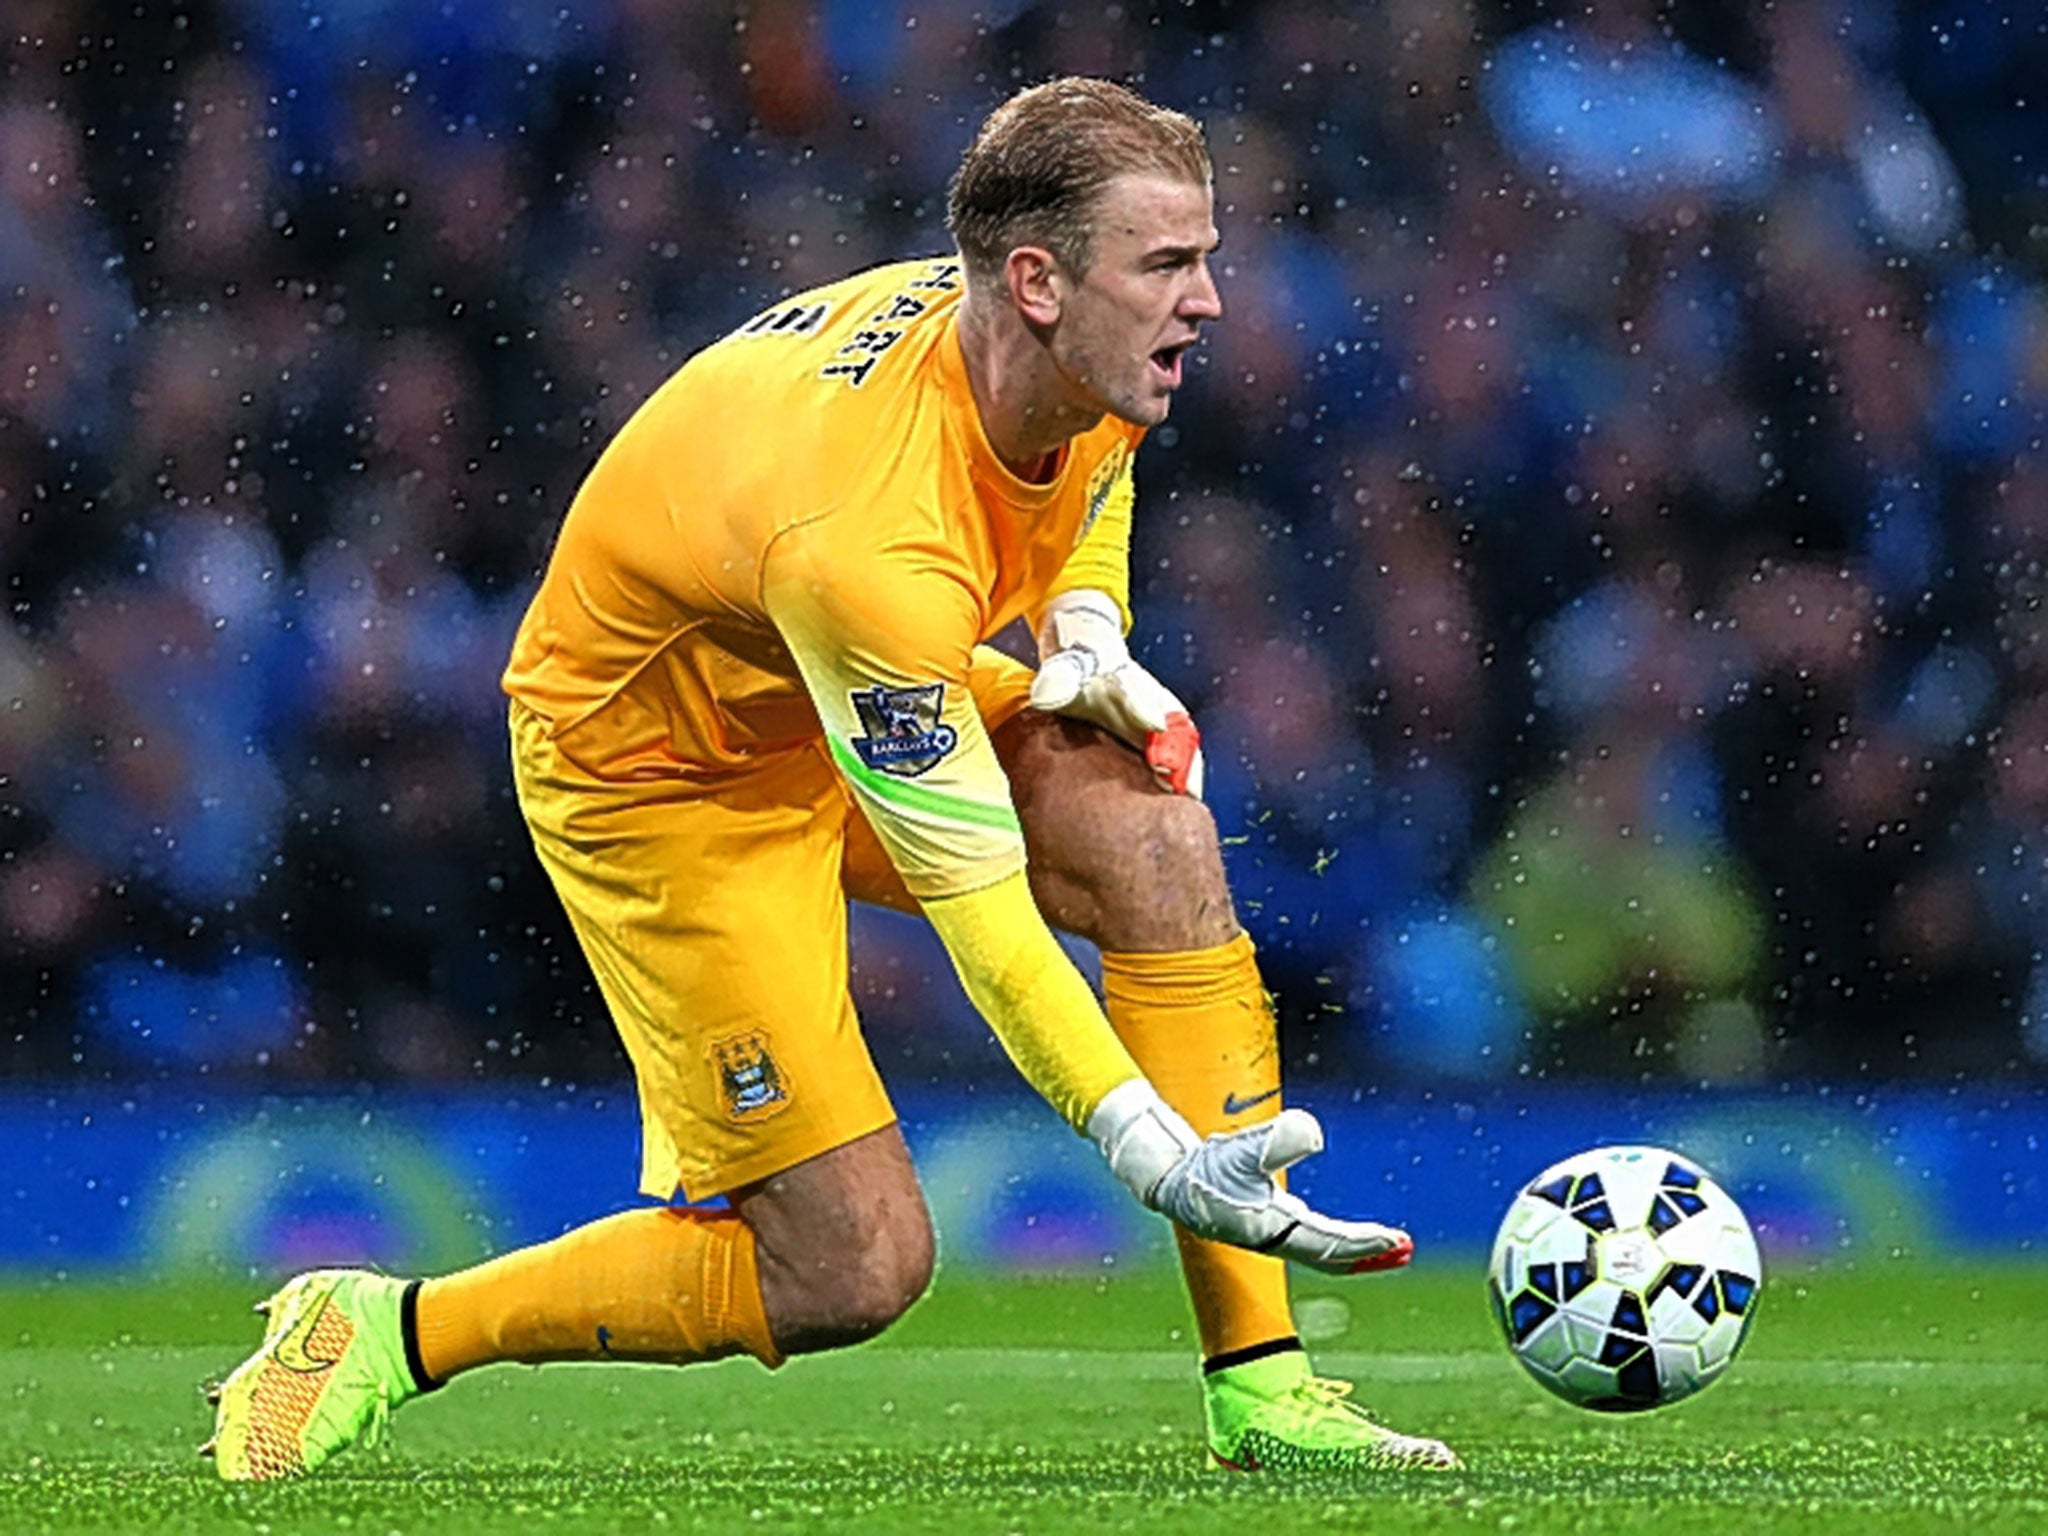 England’s Joe Hart may find himself alternating with Willy Caballero in the Manchester City goal